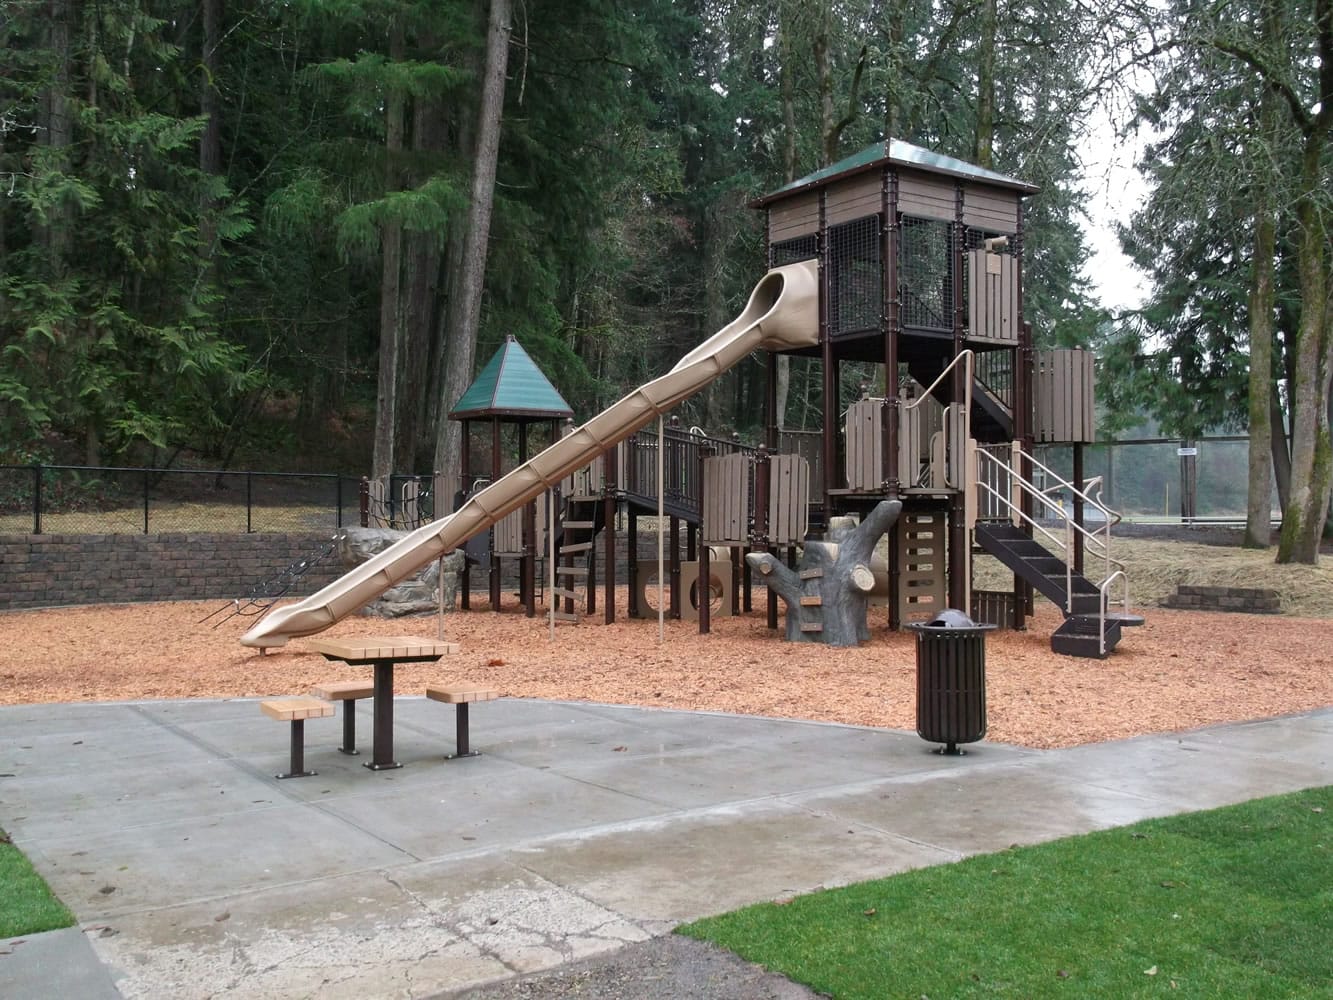 The new play structure at Abrams Park in Ridgefield.